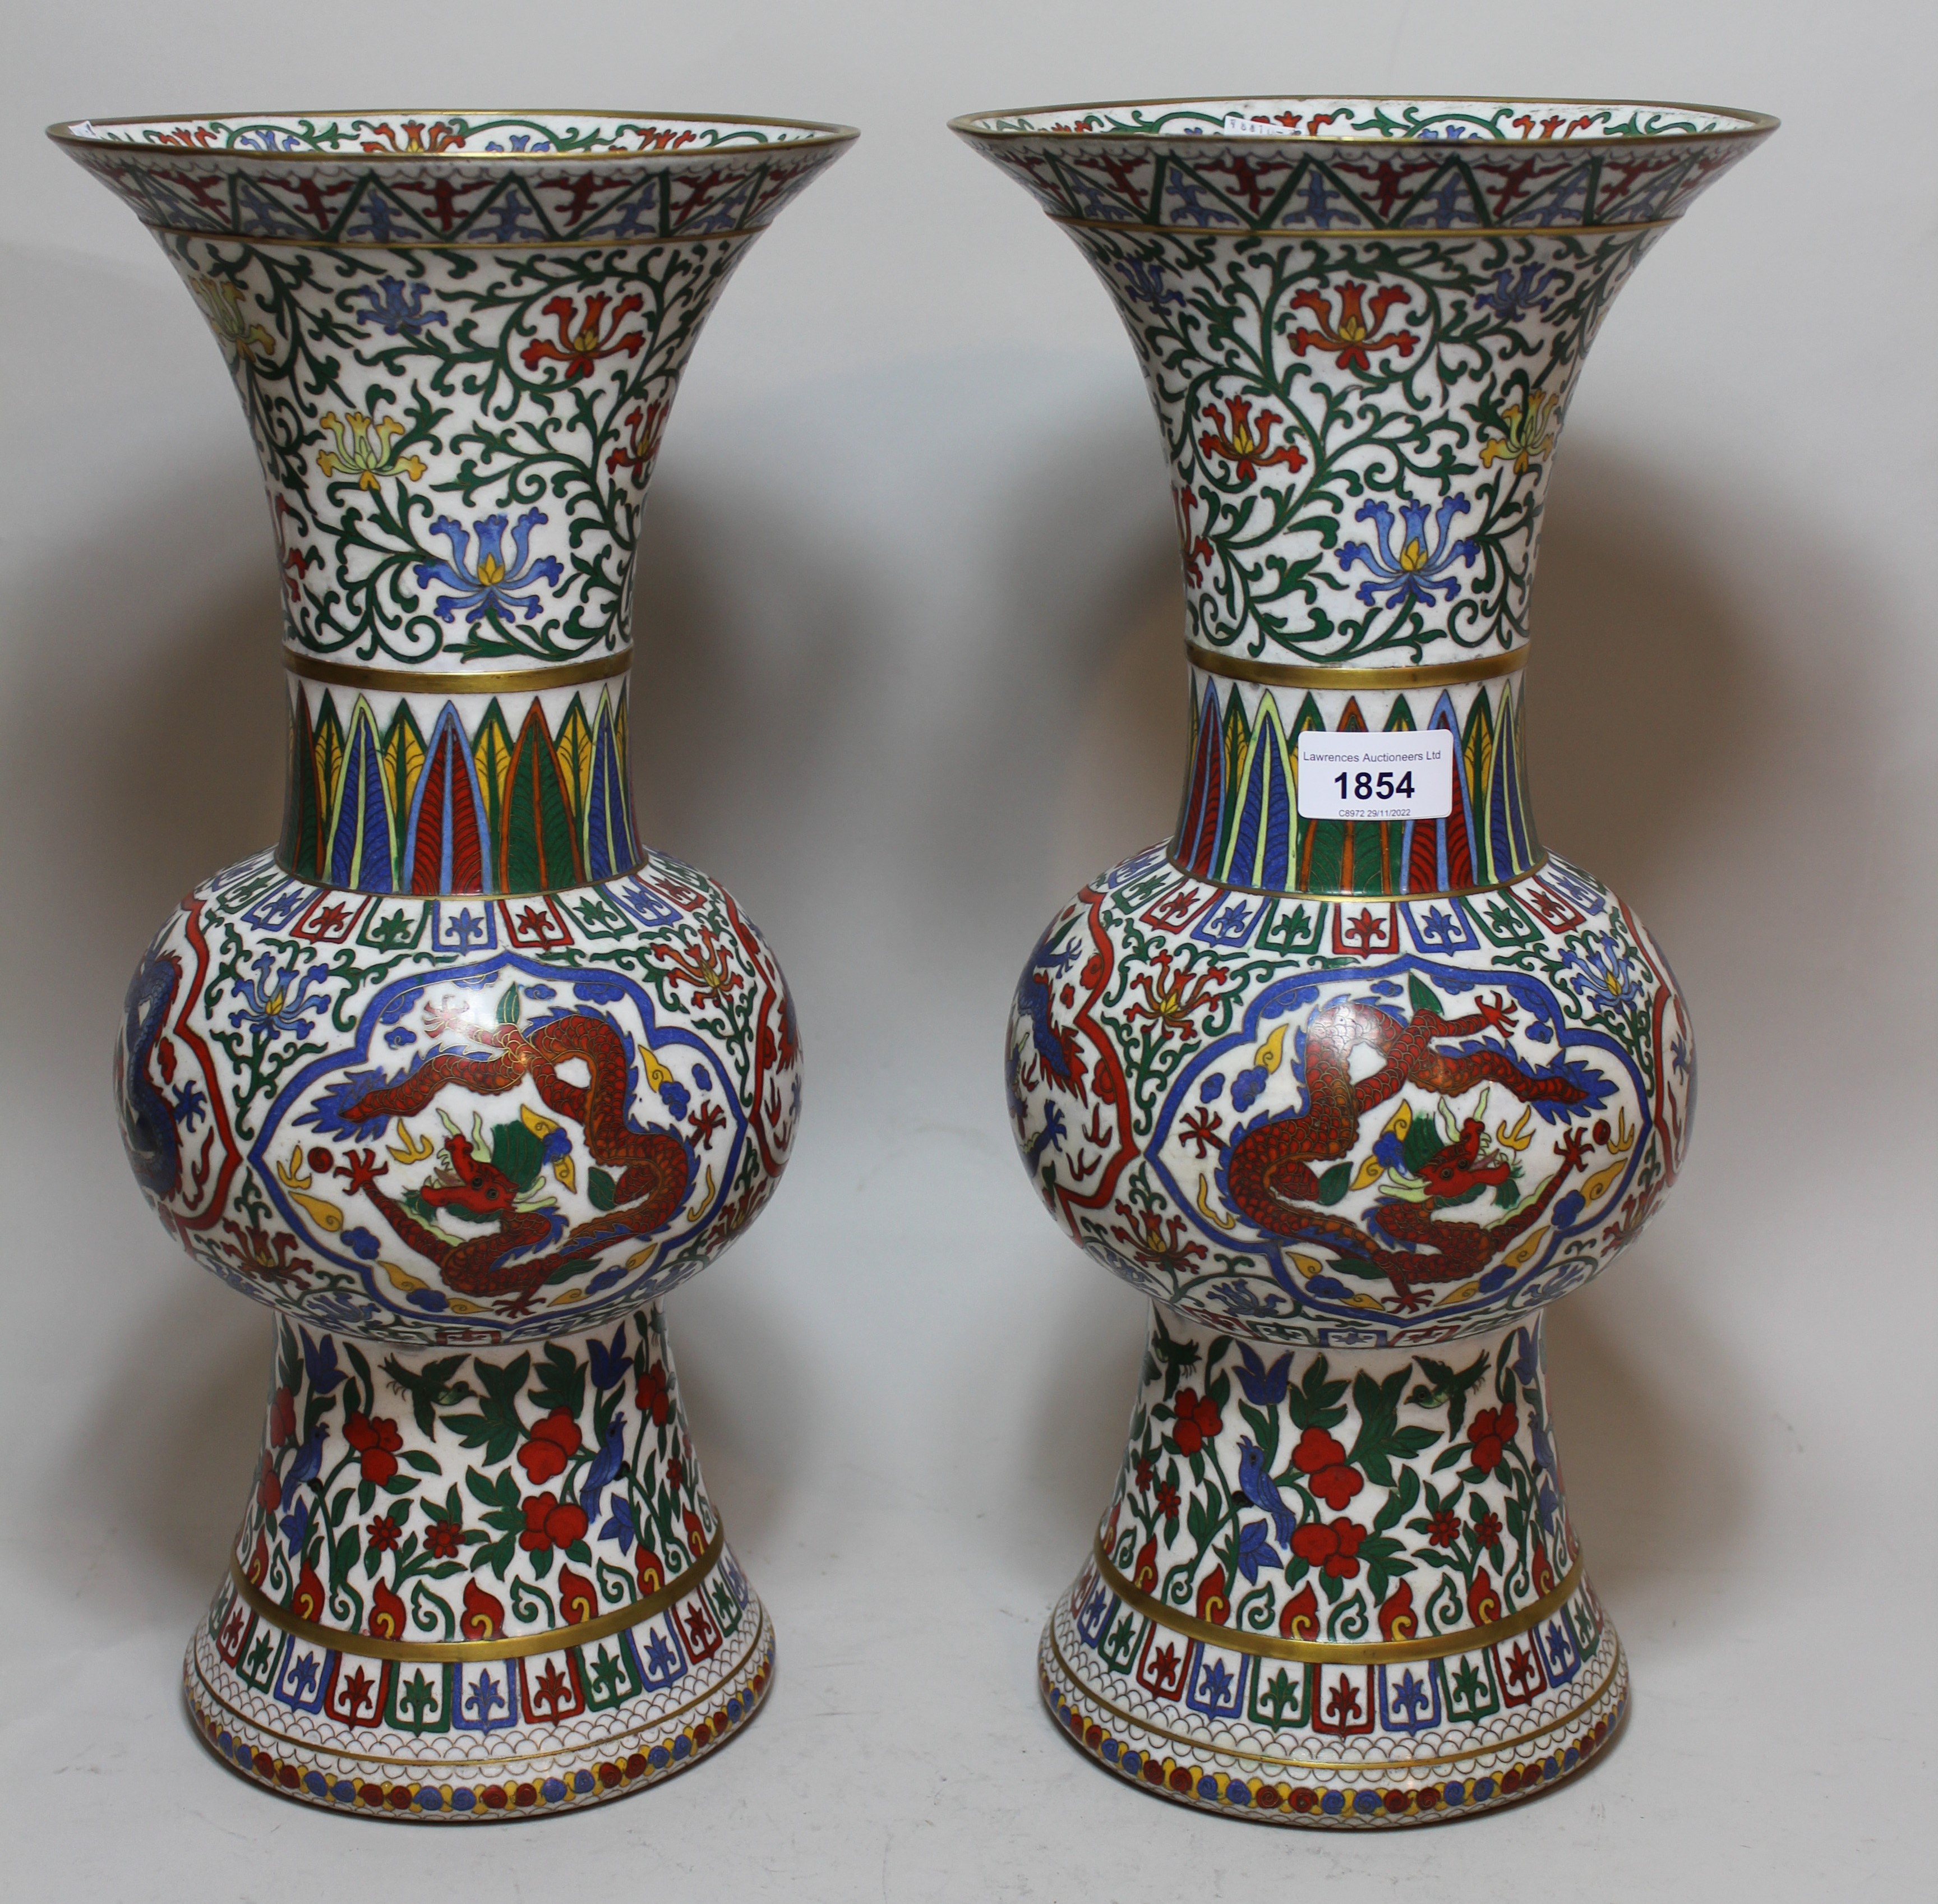 Pair of large Chinese cloisonne baluster form flared rim vases, with dragon and floral decoration,